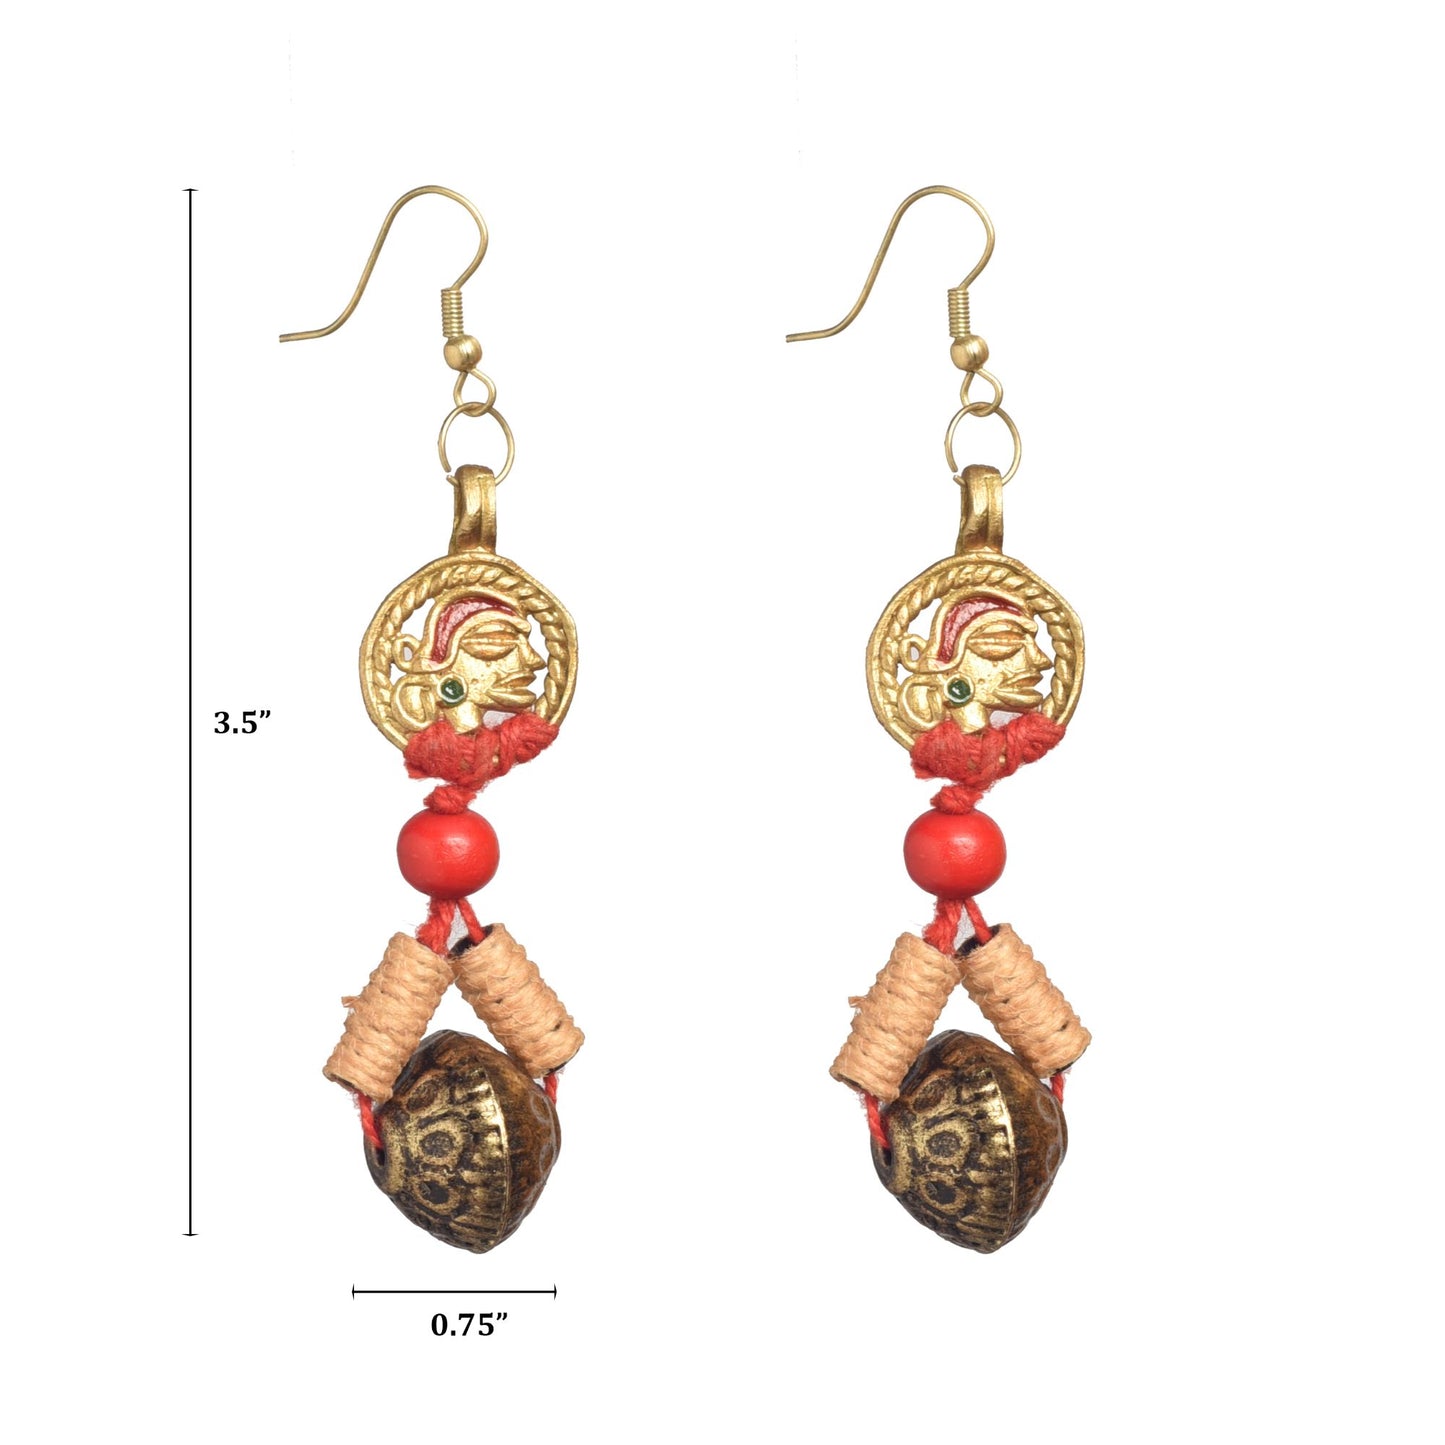 The Royal Parade Handcrafted Tribal Earrings